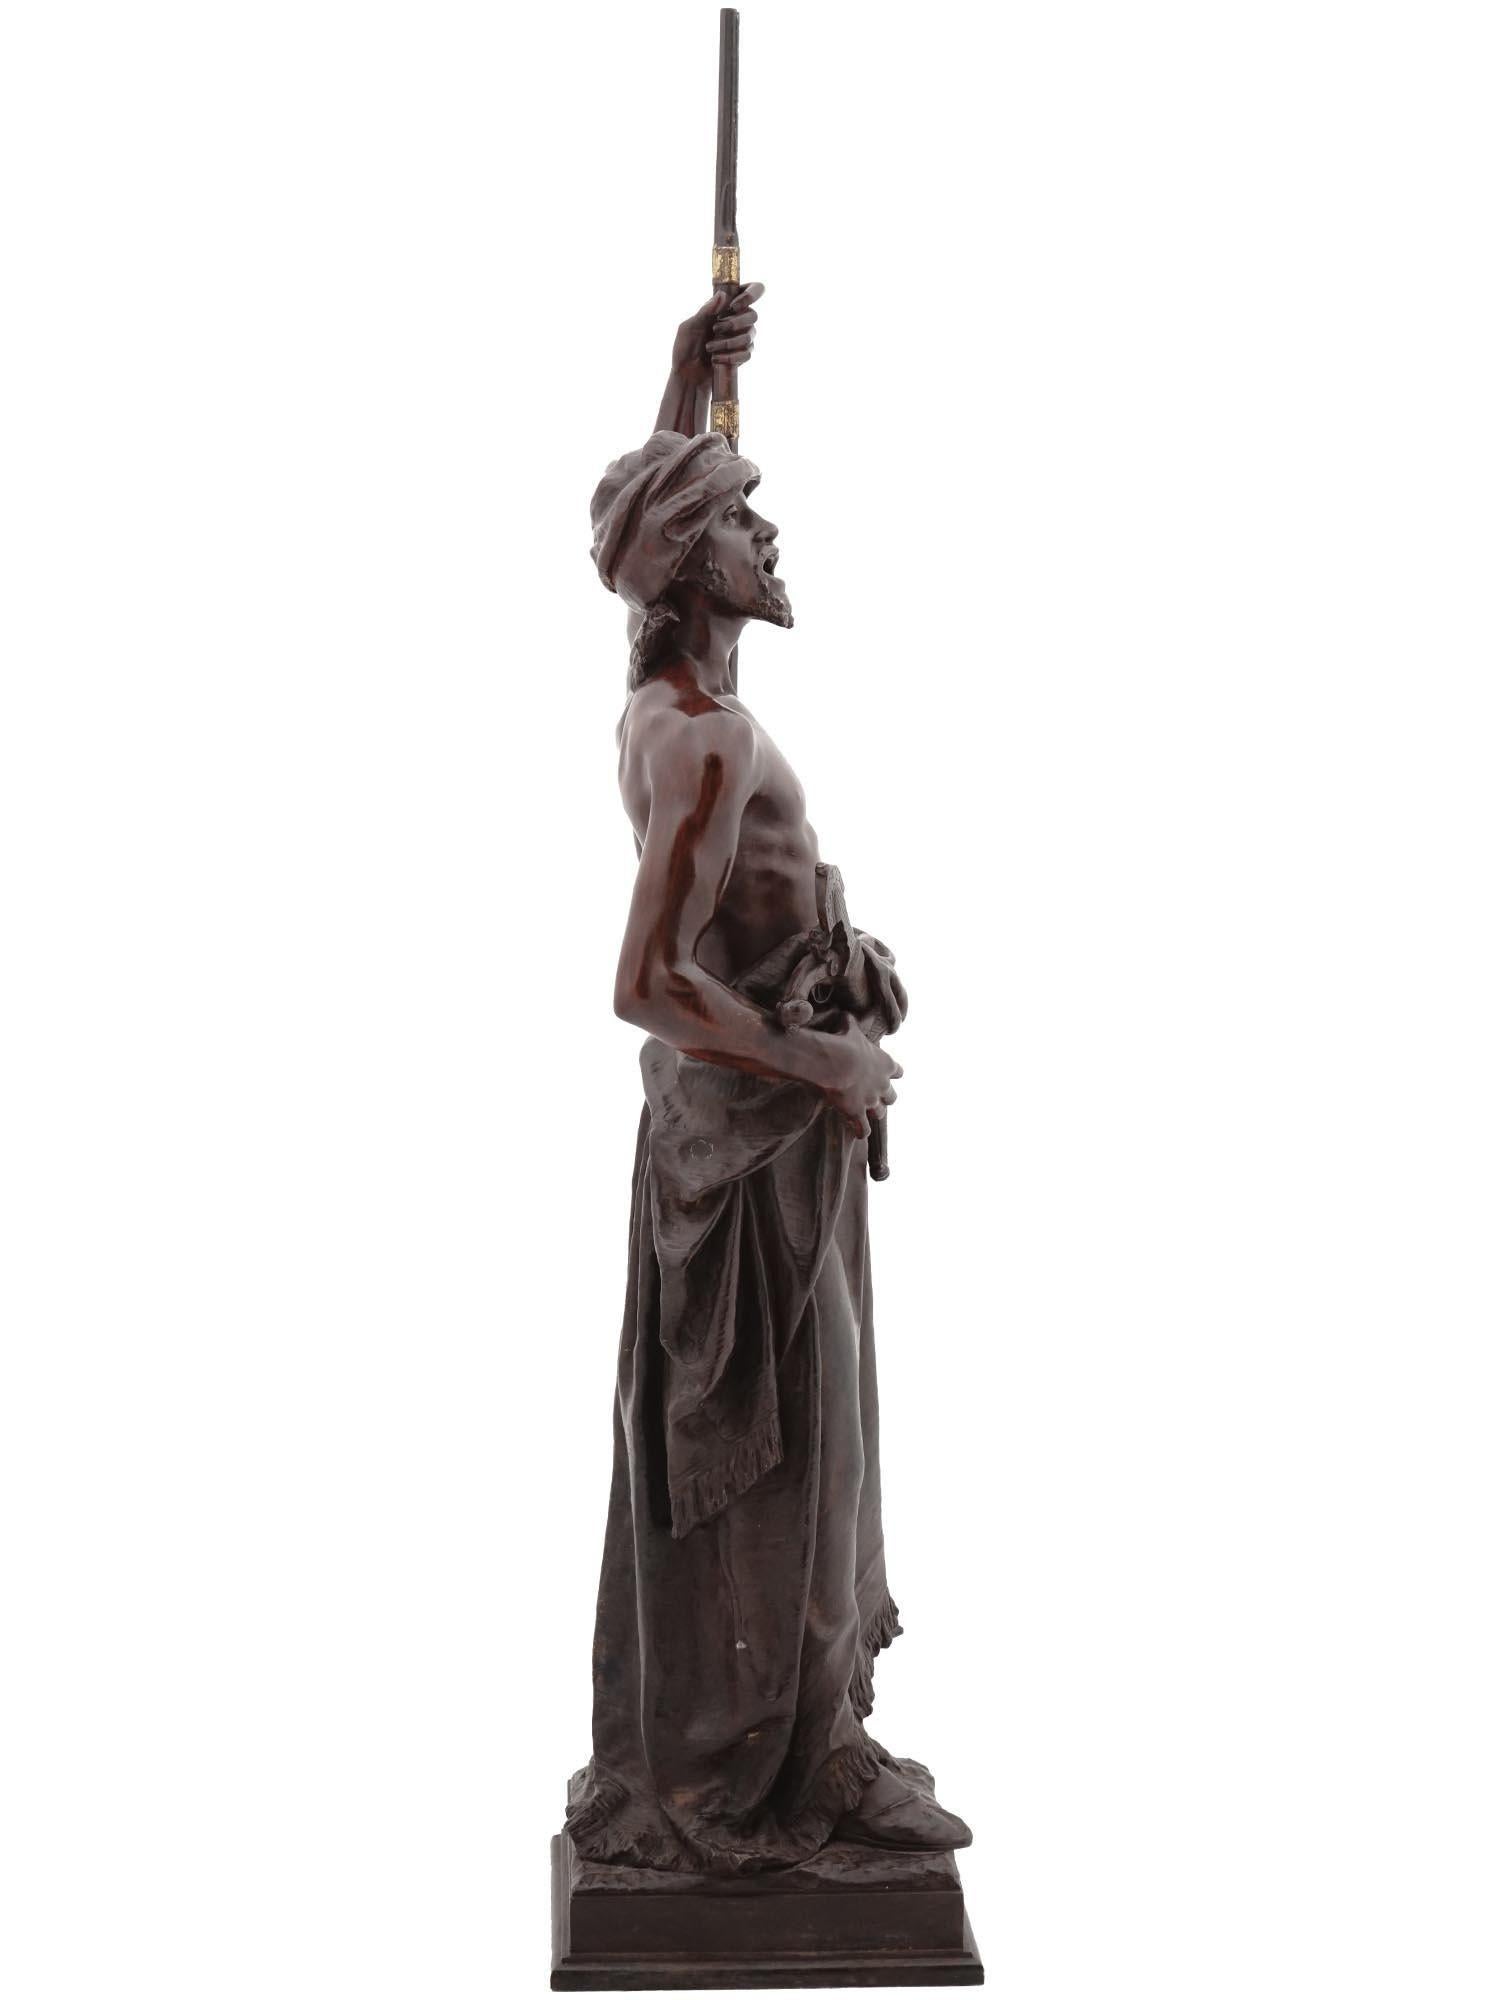 Orientalist patinated and partially gilt bronze sculpture of an Arabian soldier standing guard with rifle after Joaquin Angles (1859-1925).  Signed in the cast.